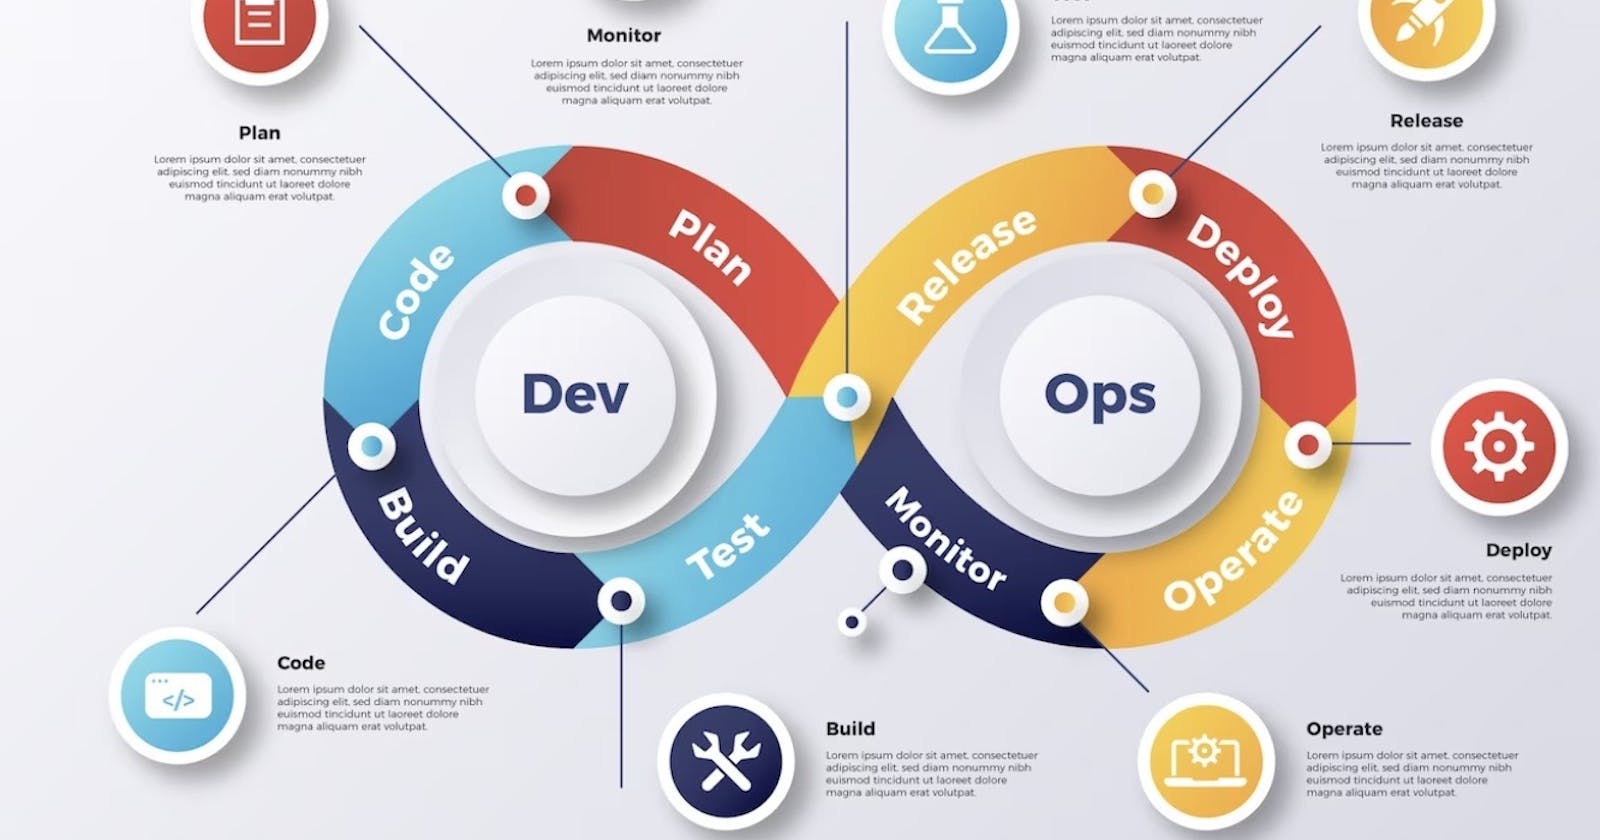 Getting started with DevOps!